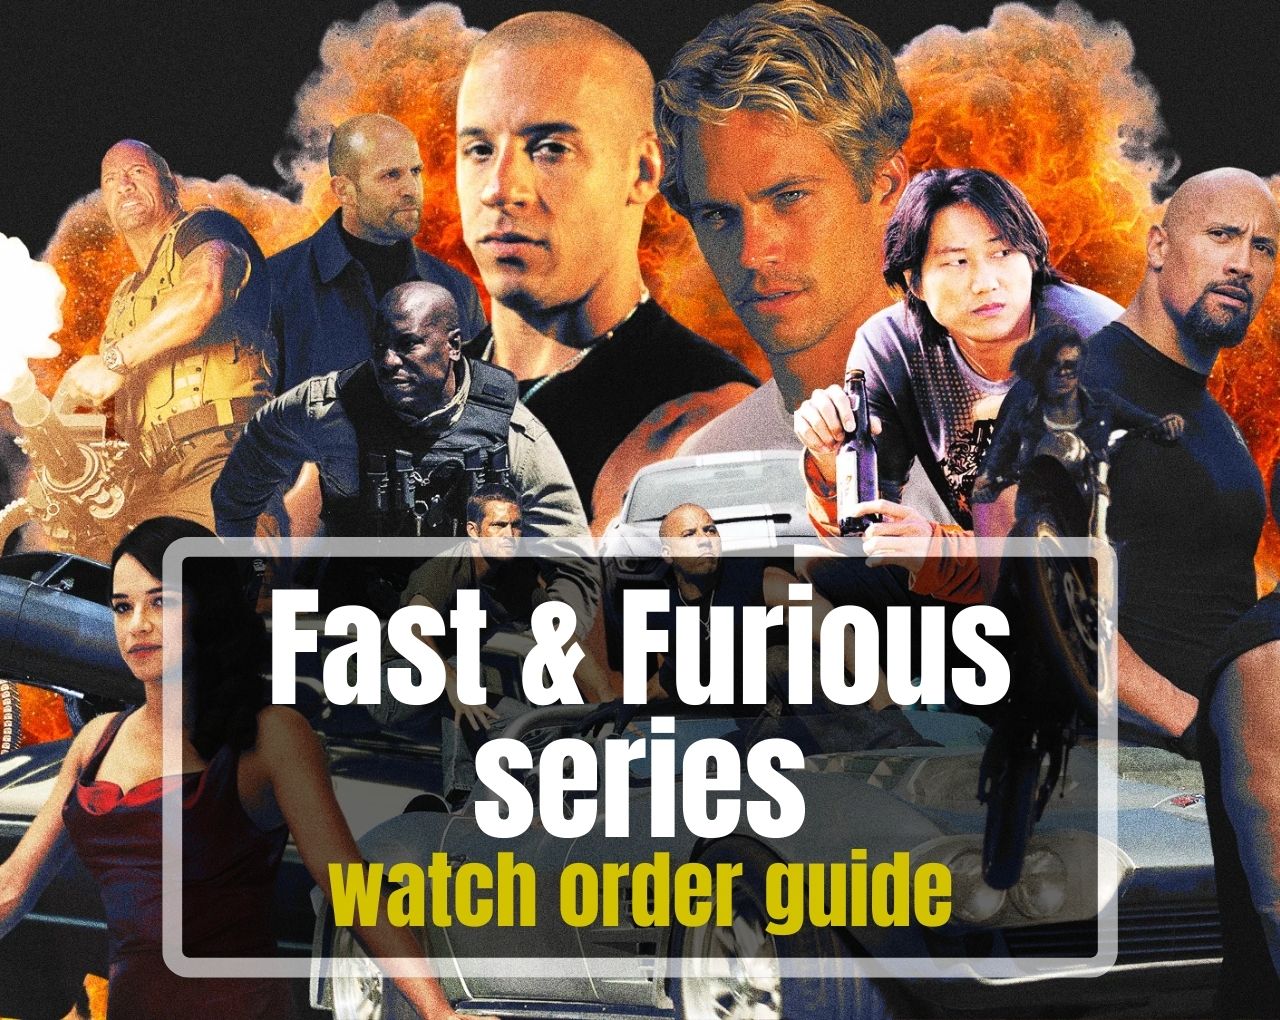 Fast & Furious Series watch order guide